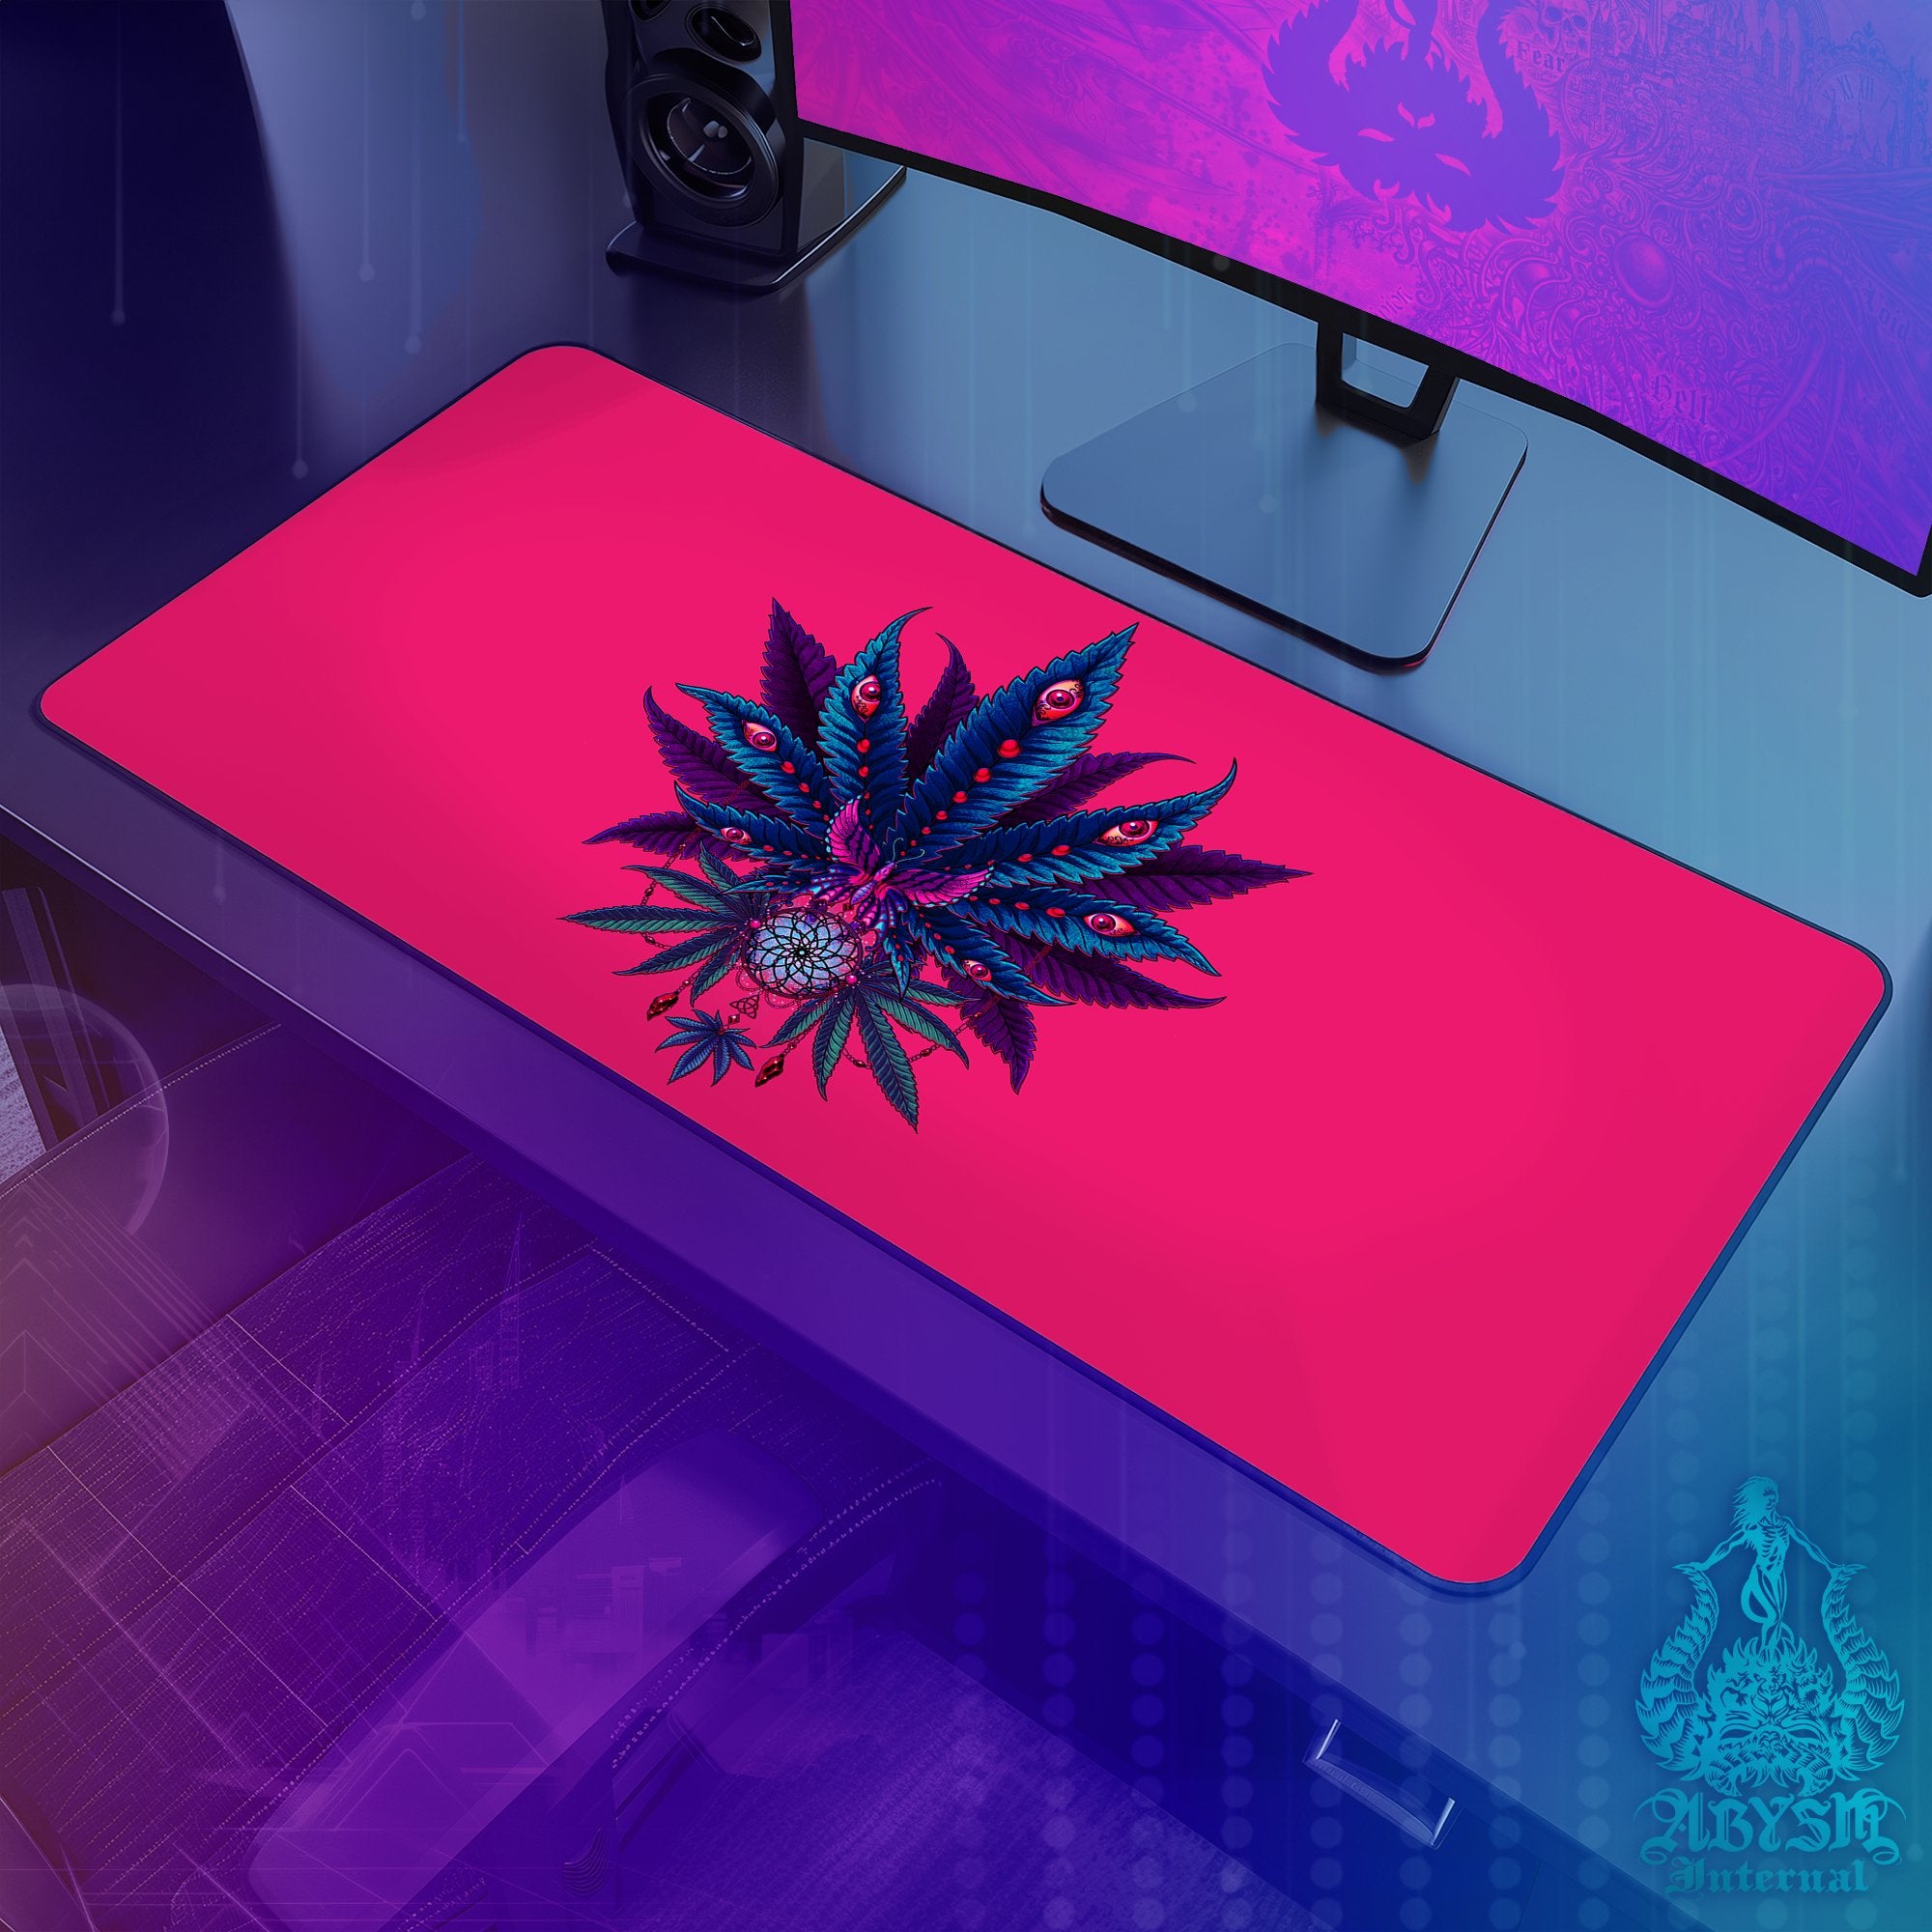 Neon Weed Gaming Desk Mat, Cannabis Mouse Pad, 420 Table Protector Cover, Marijuana Workpad, Art Print - Pink and Green, 2 Colors - Abysm Internal